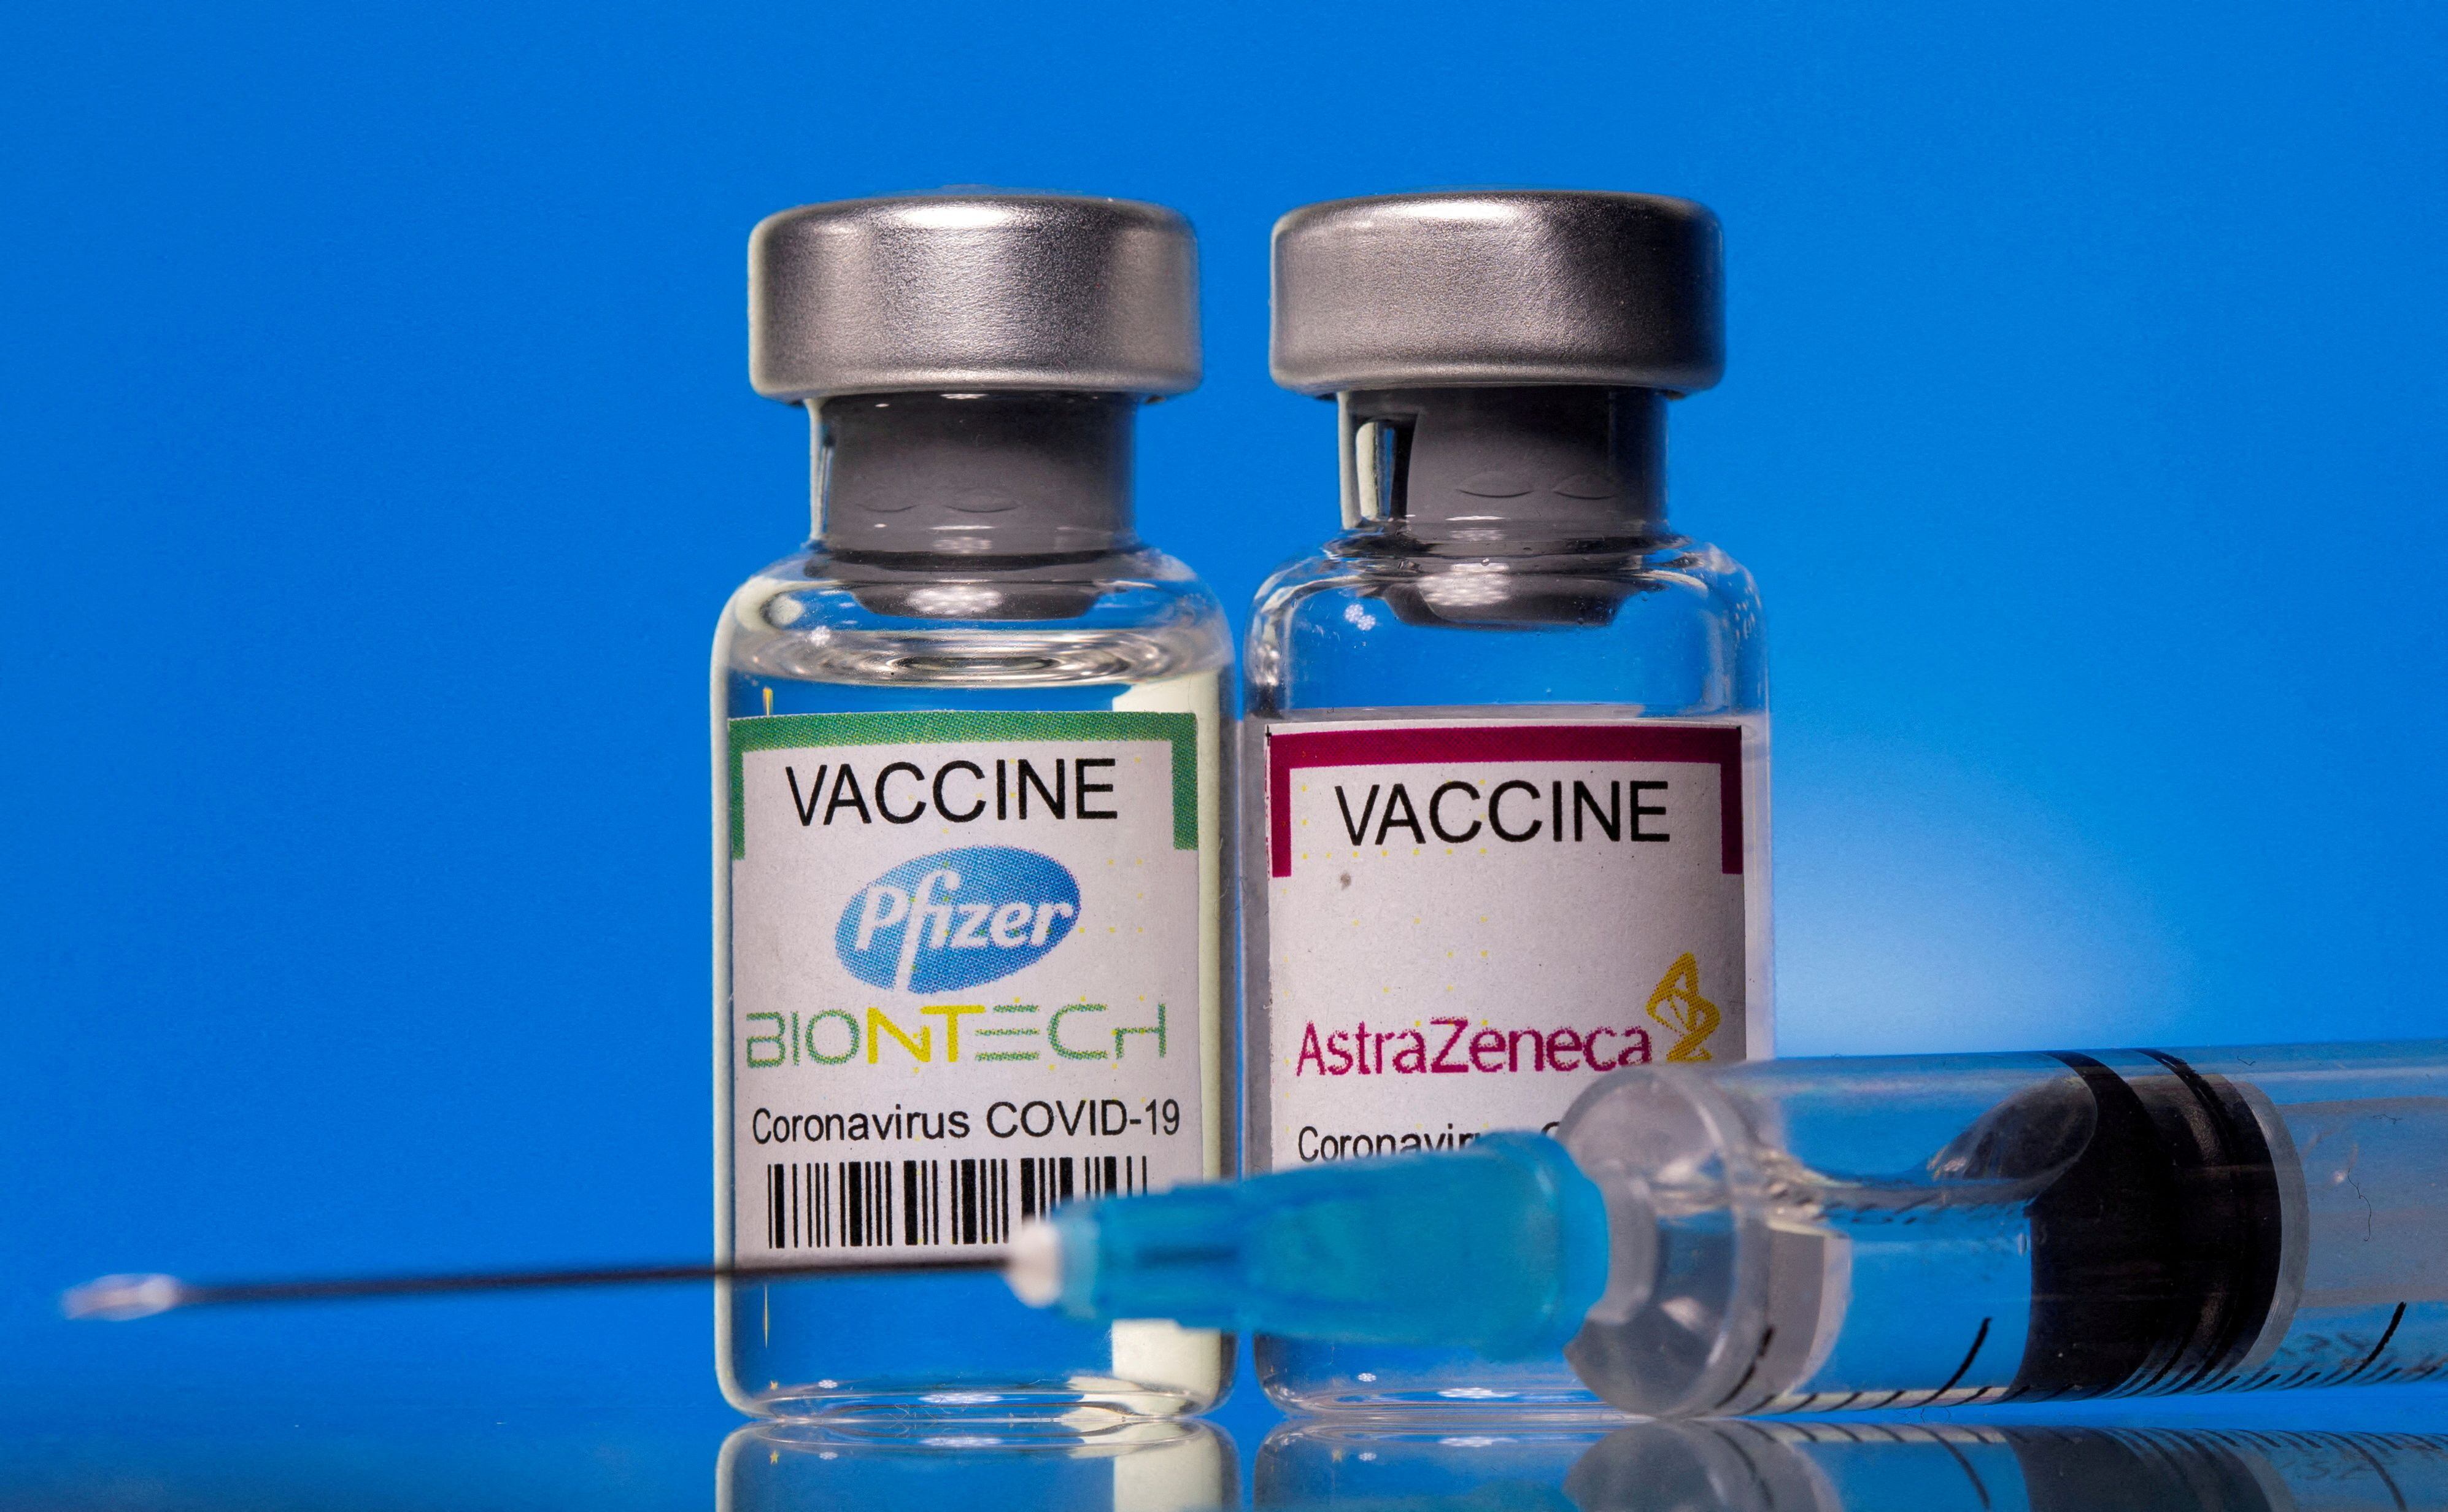 FILE PHOTO: Vials with Pfizer-BioNTech and AstraZeneca COVID-19 vaccine labels are seen in this illustration picture taken March 19, 2021. REUTERS/  REUTERS/Dado Ruvic/Illustration/File Photo